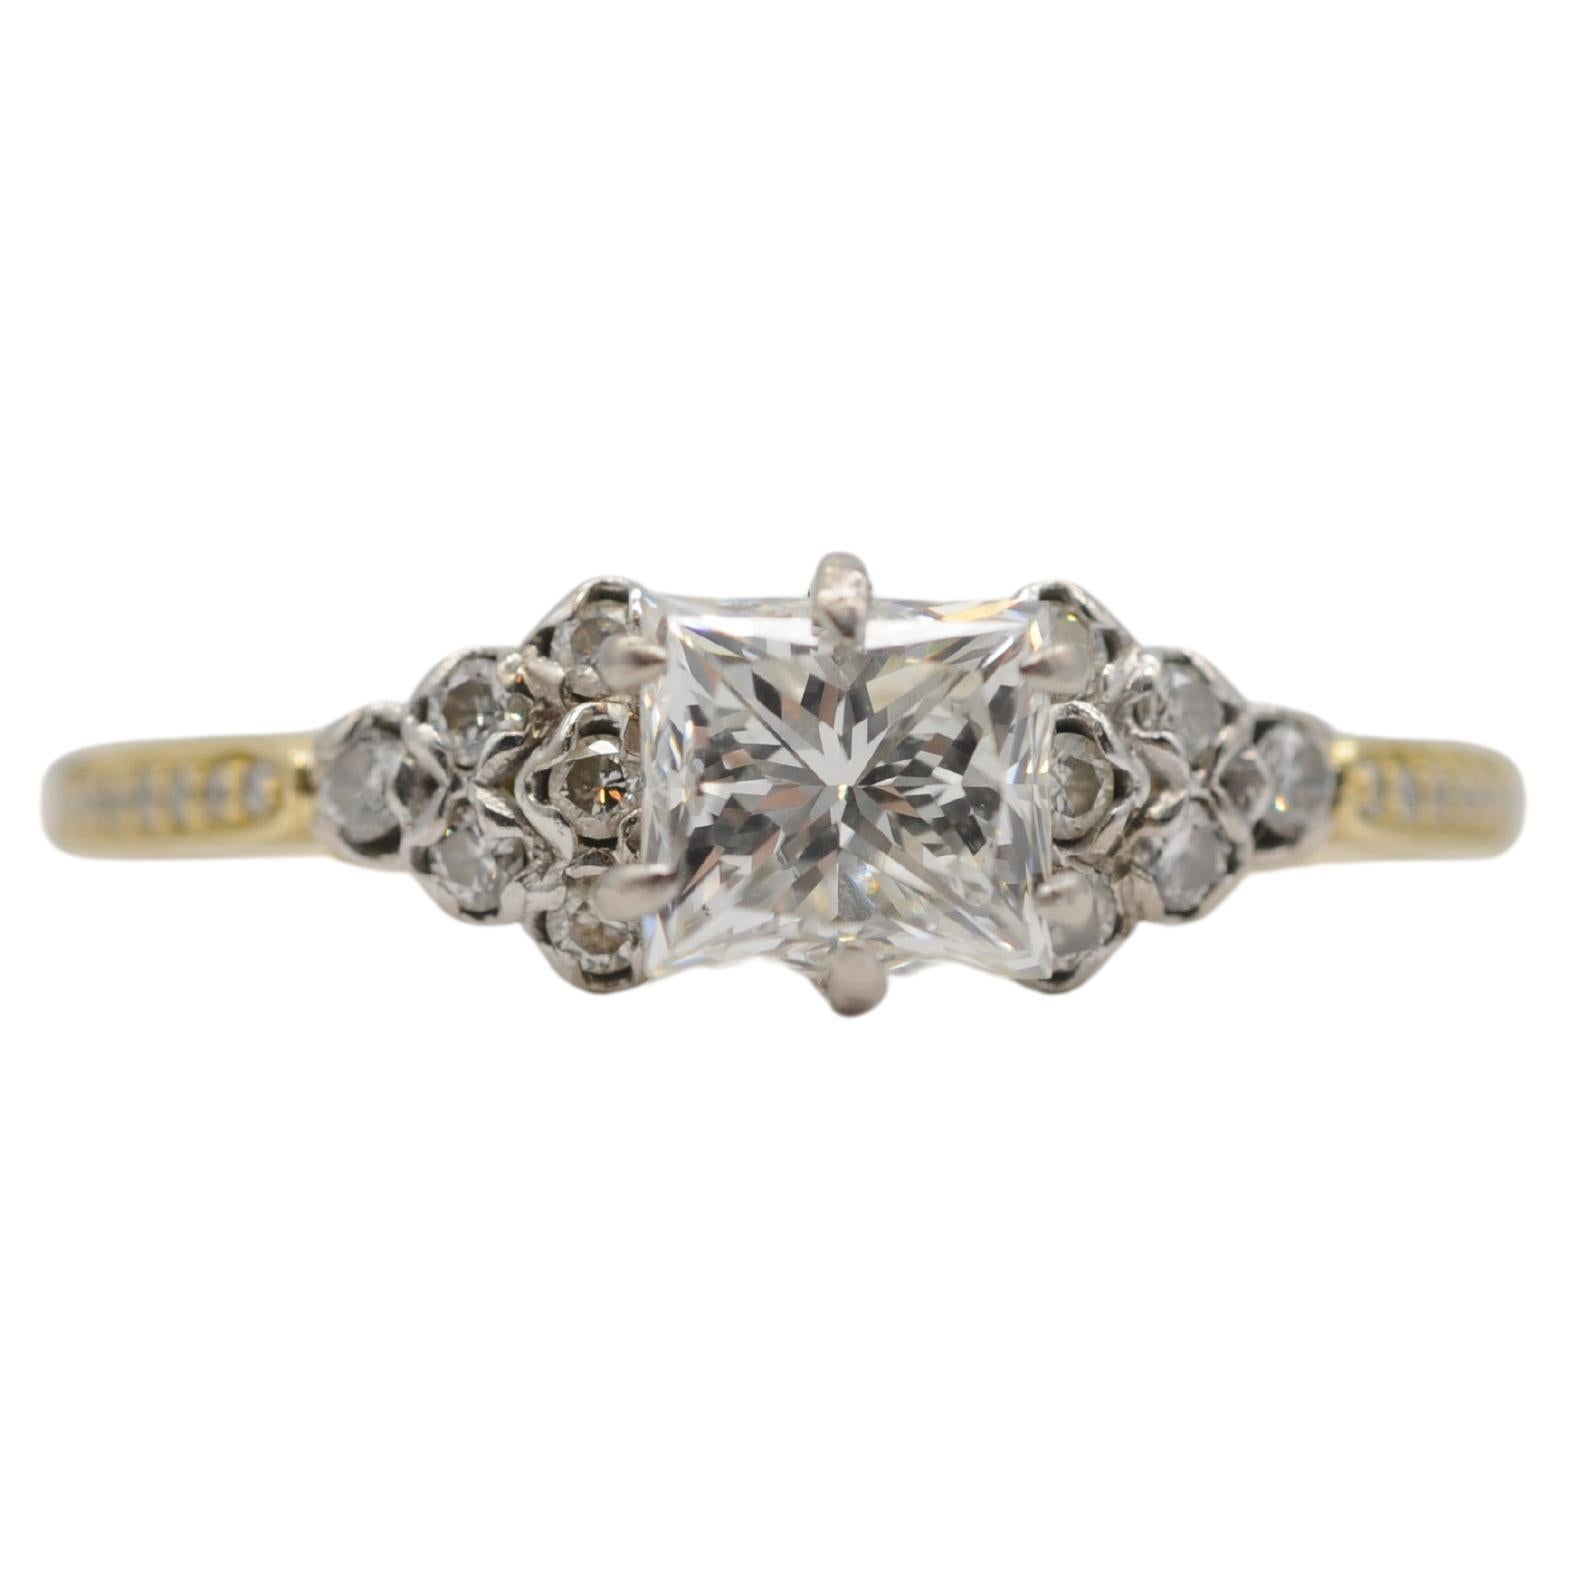 Introducing a stunning princess/Rectangular modified brilliant cut diamond certified by the Gemological Institute of America (GIA) set in an exquisite 18k yellow gold ring, adorned with delicate brilliant accents to enhance the charm of the large